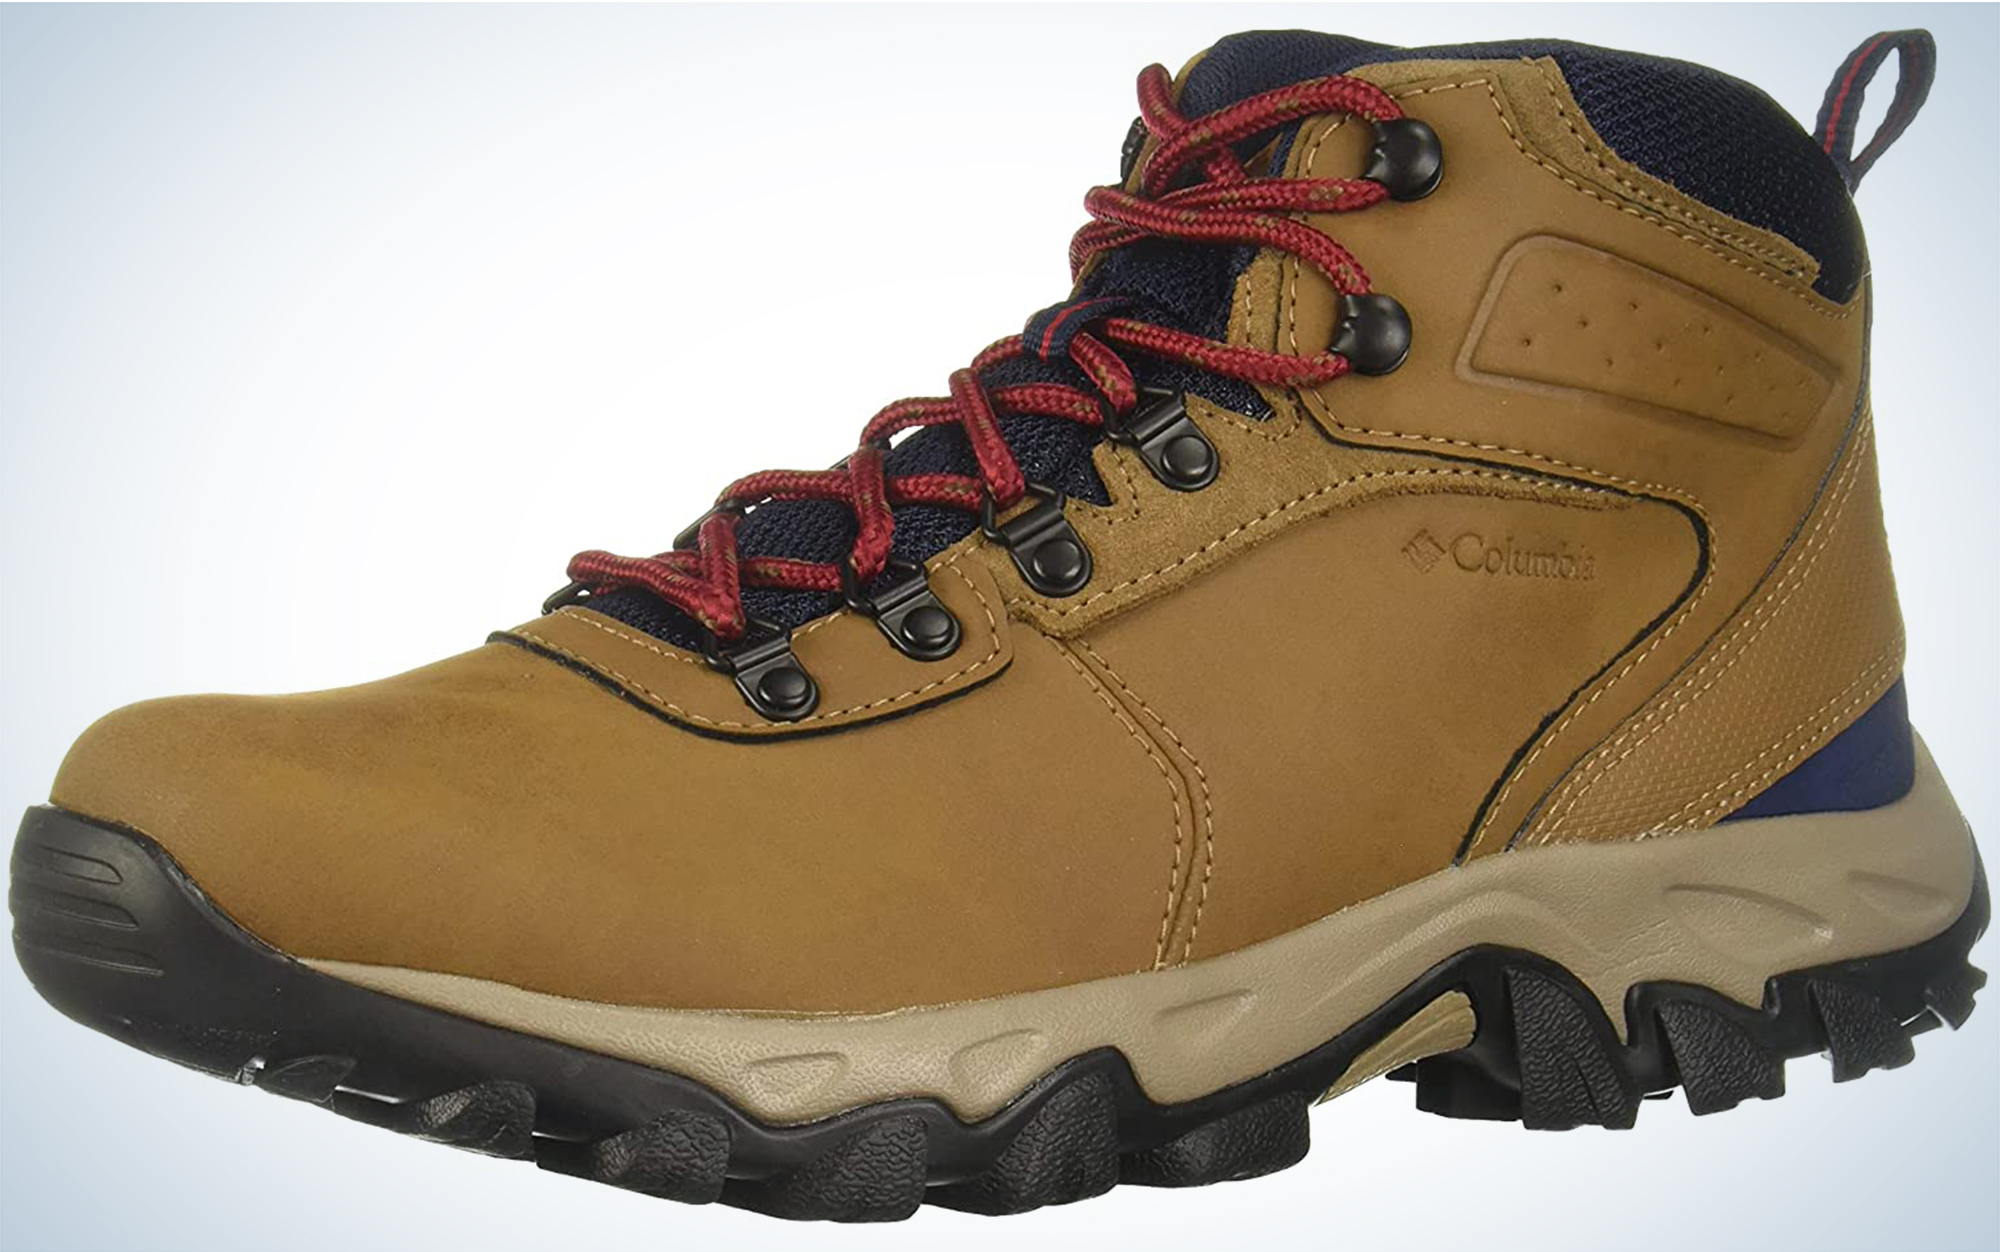 The Columbia Newton Ridge Plus II Waterproof are the best budget hiking boots for men.